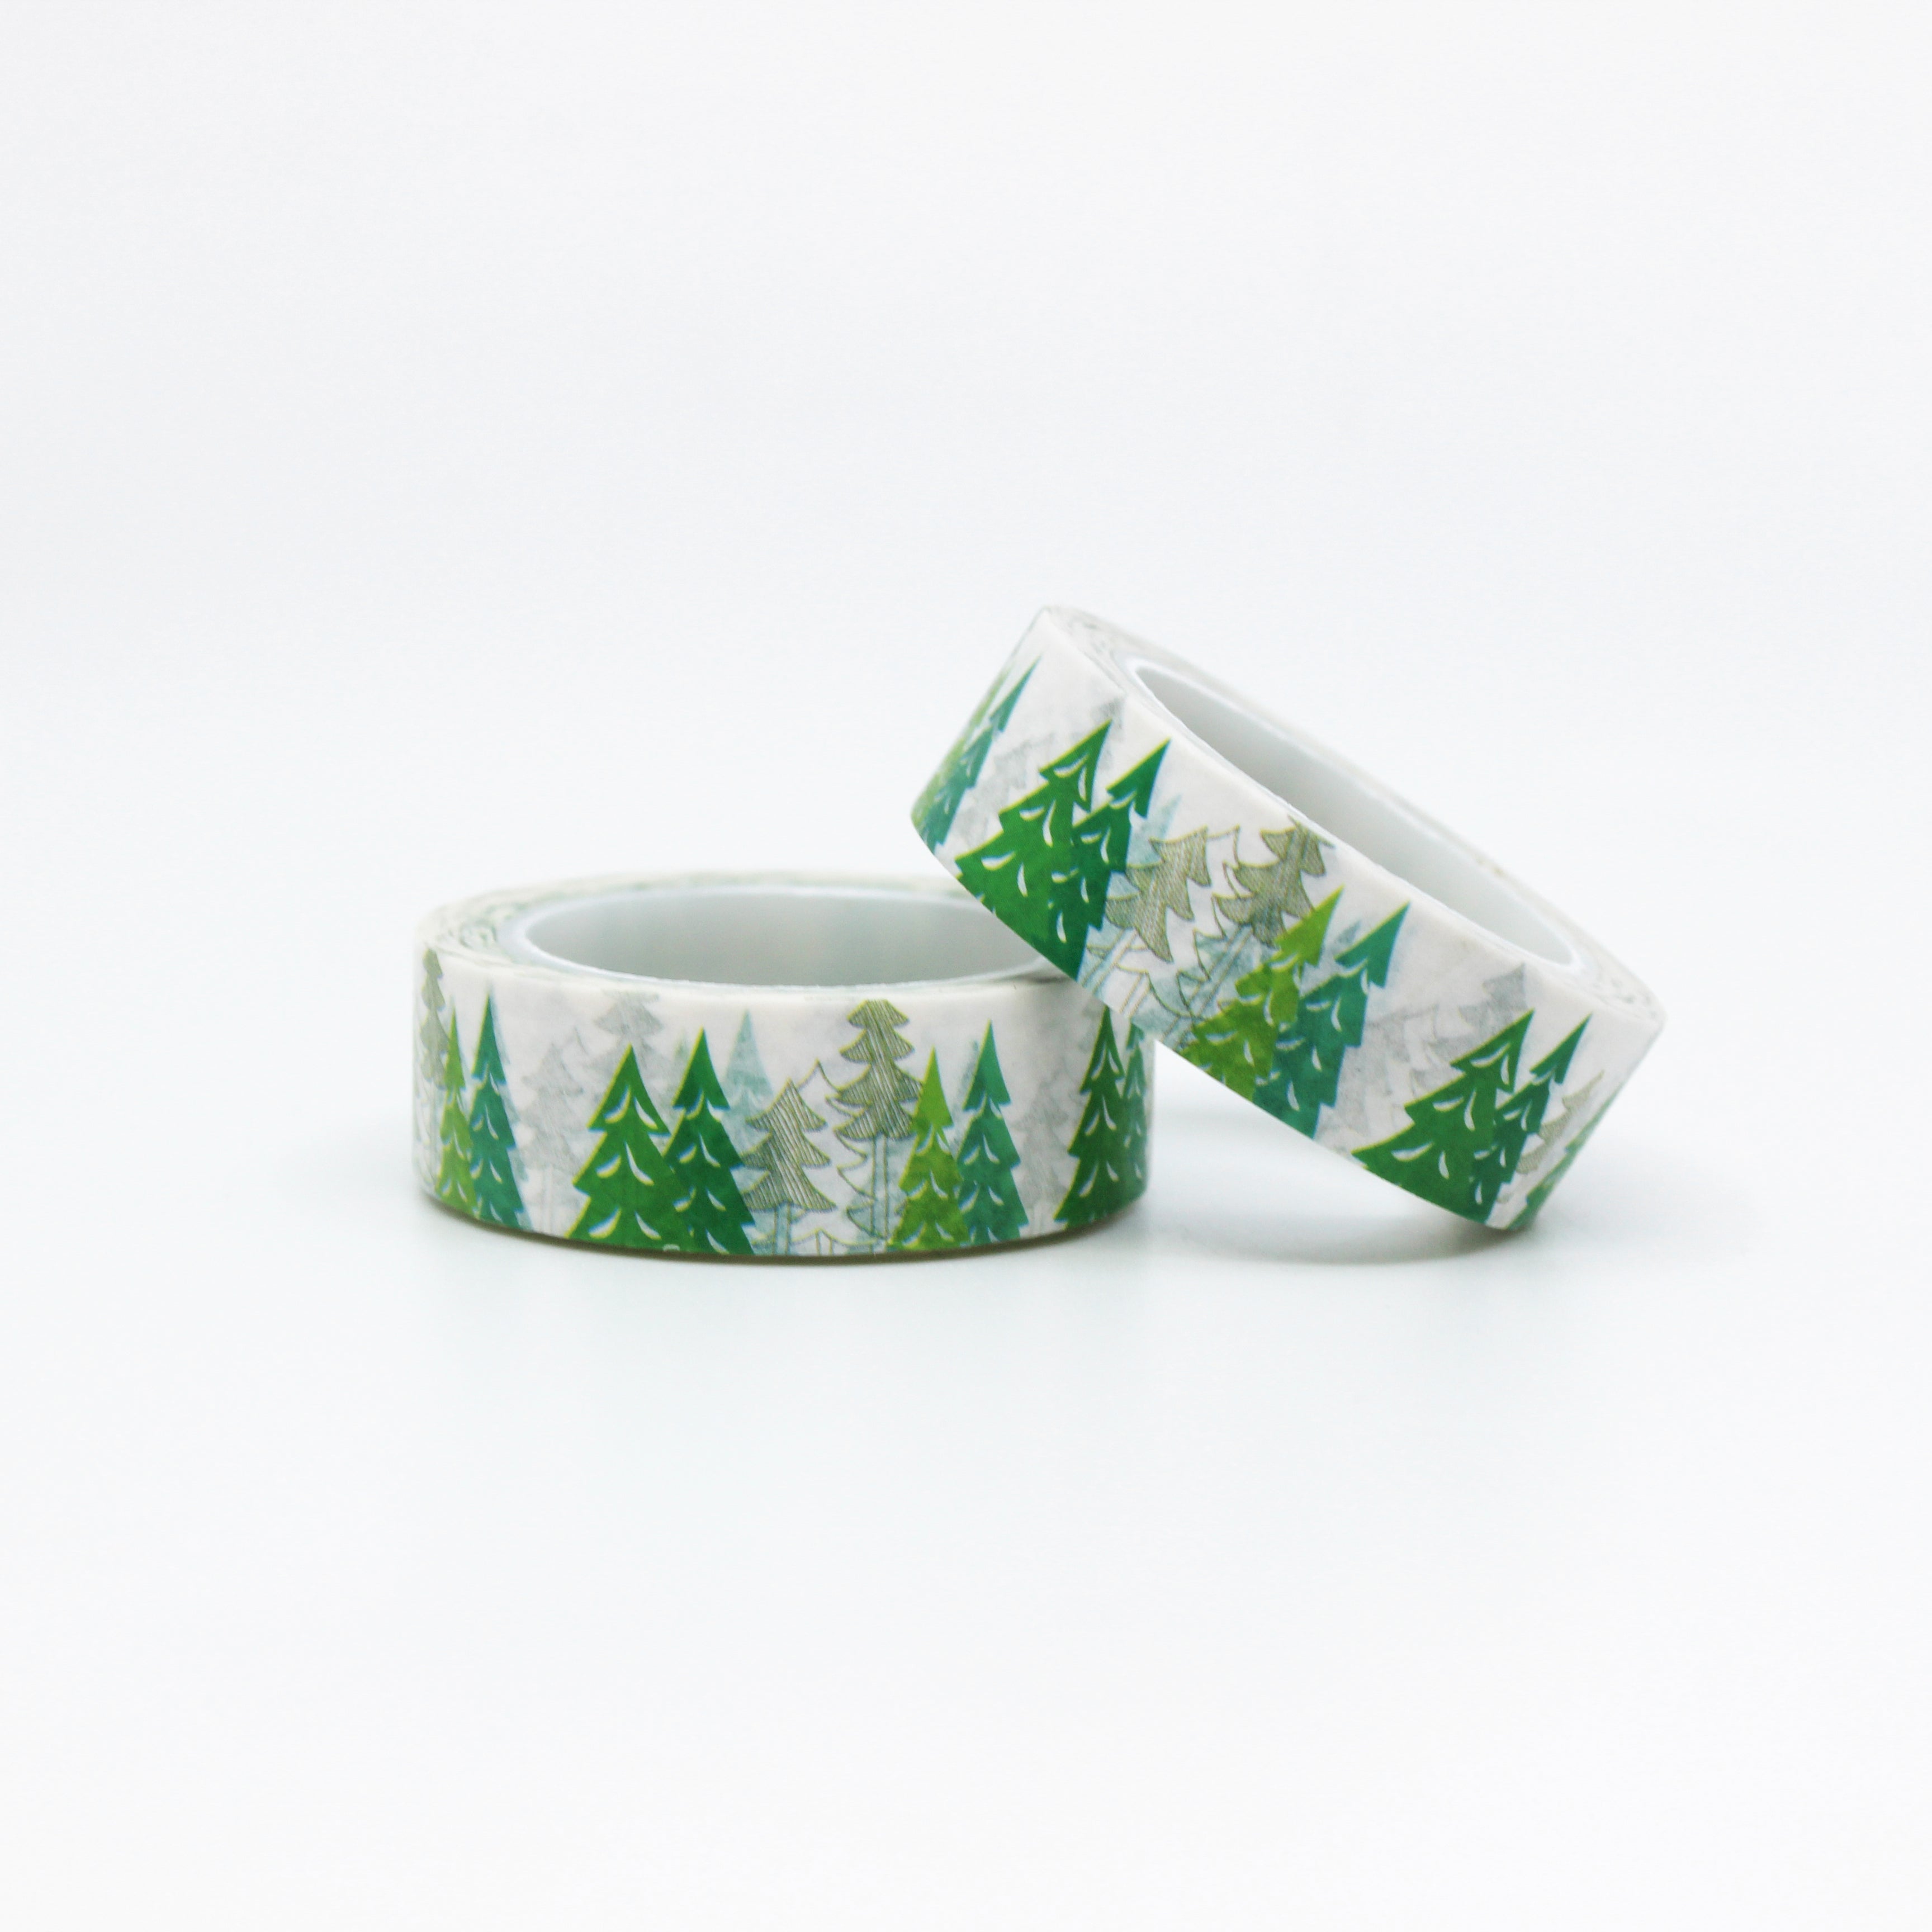 This is a roll of green Christmas pine tree washi tapes from BBB Supplies Craft Shop